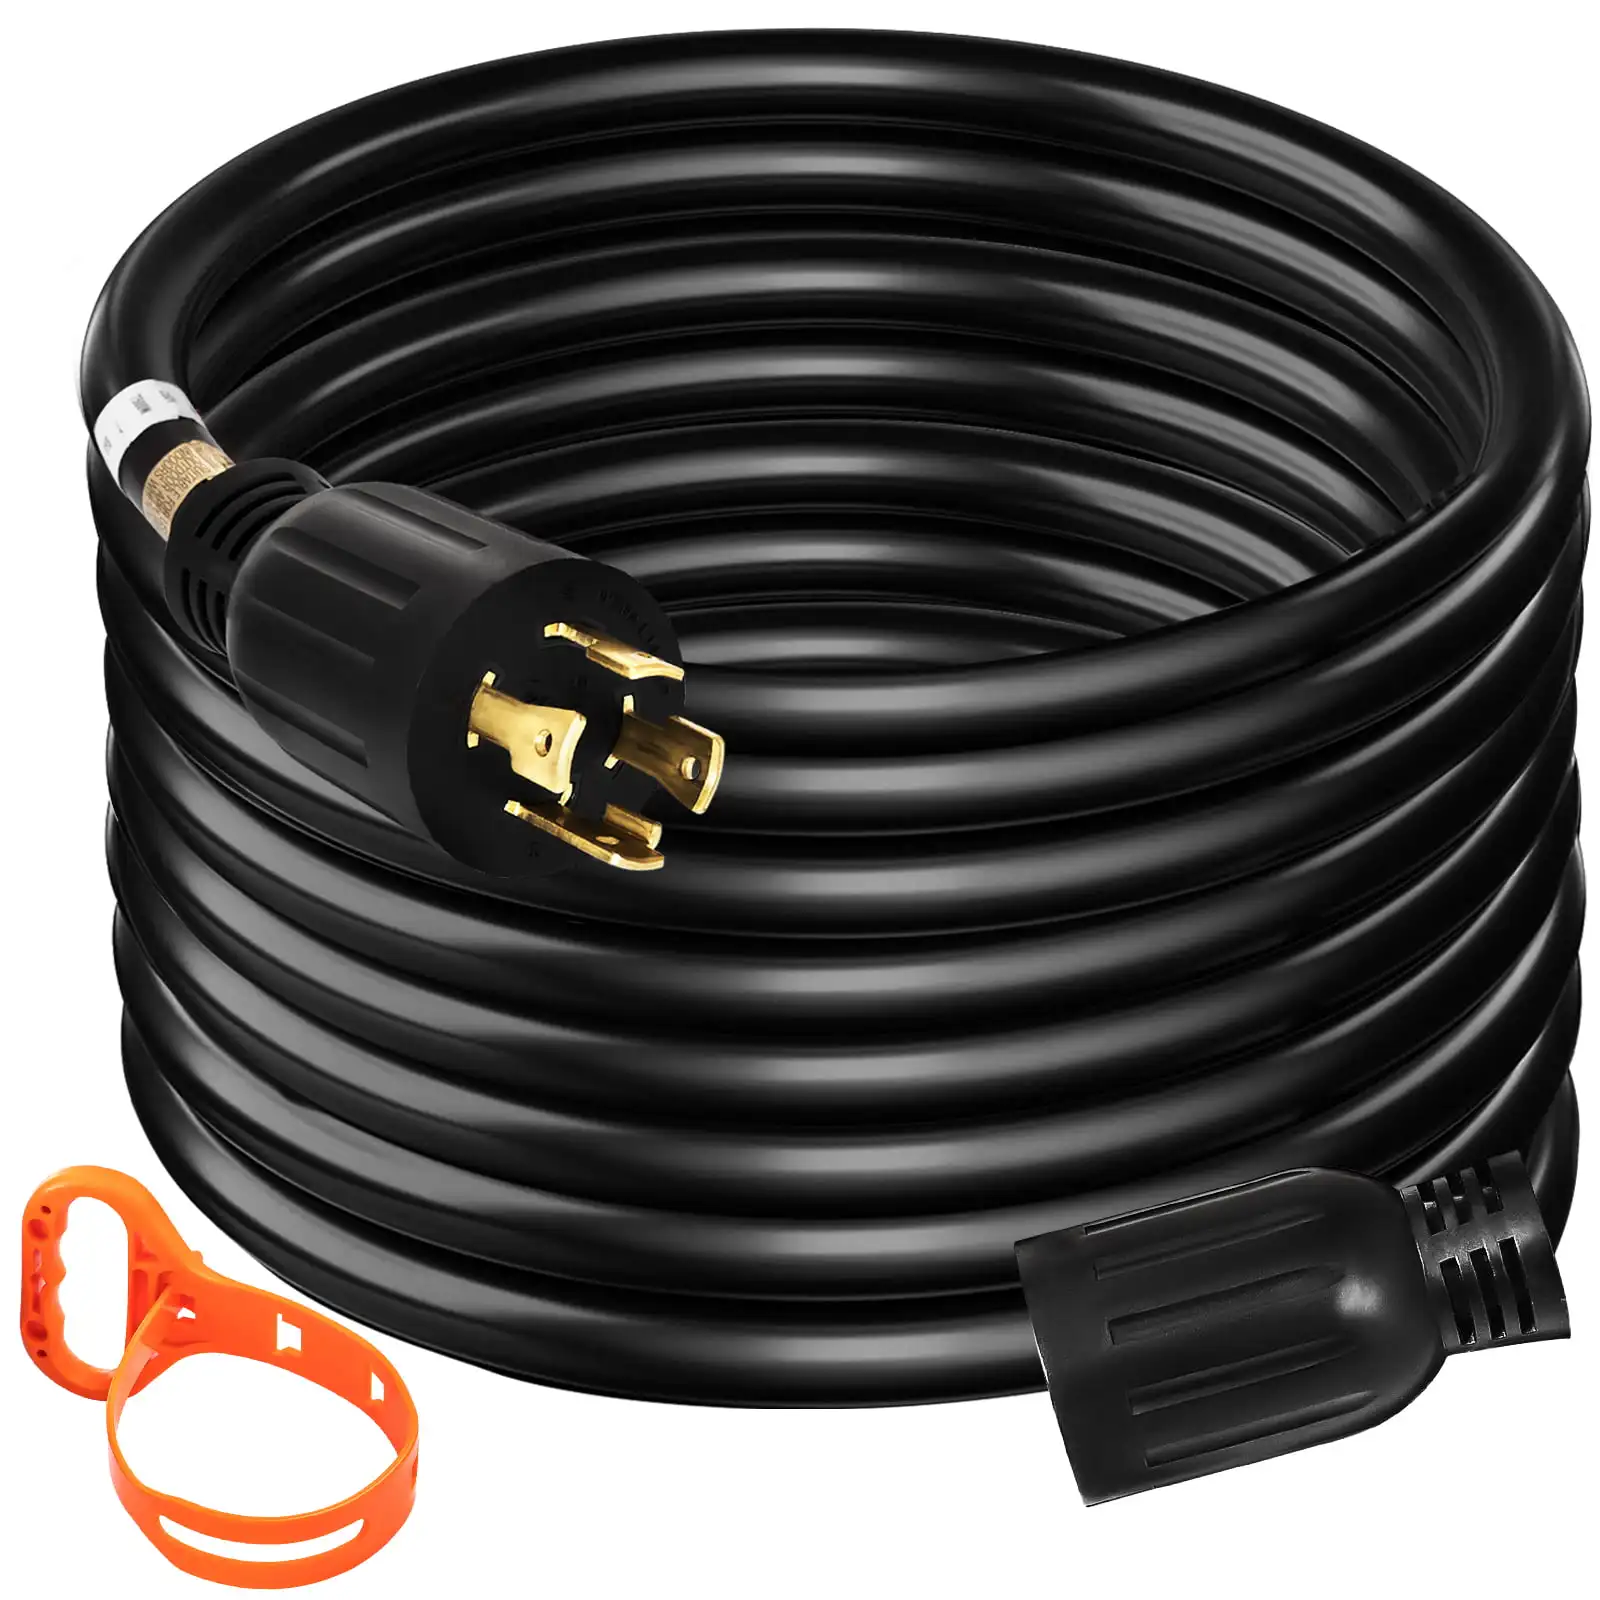 

50Ft 30 Amp Generator Extension Cord 4 Wire 10 Gauge 125V 250V UL & CUL Listed Generator Power Cord Twist Lock Connectors